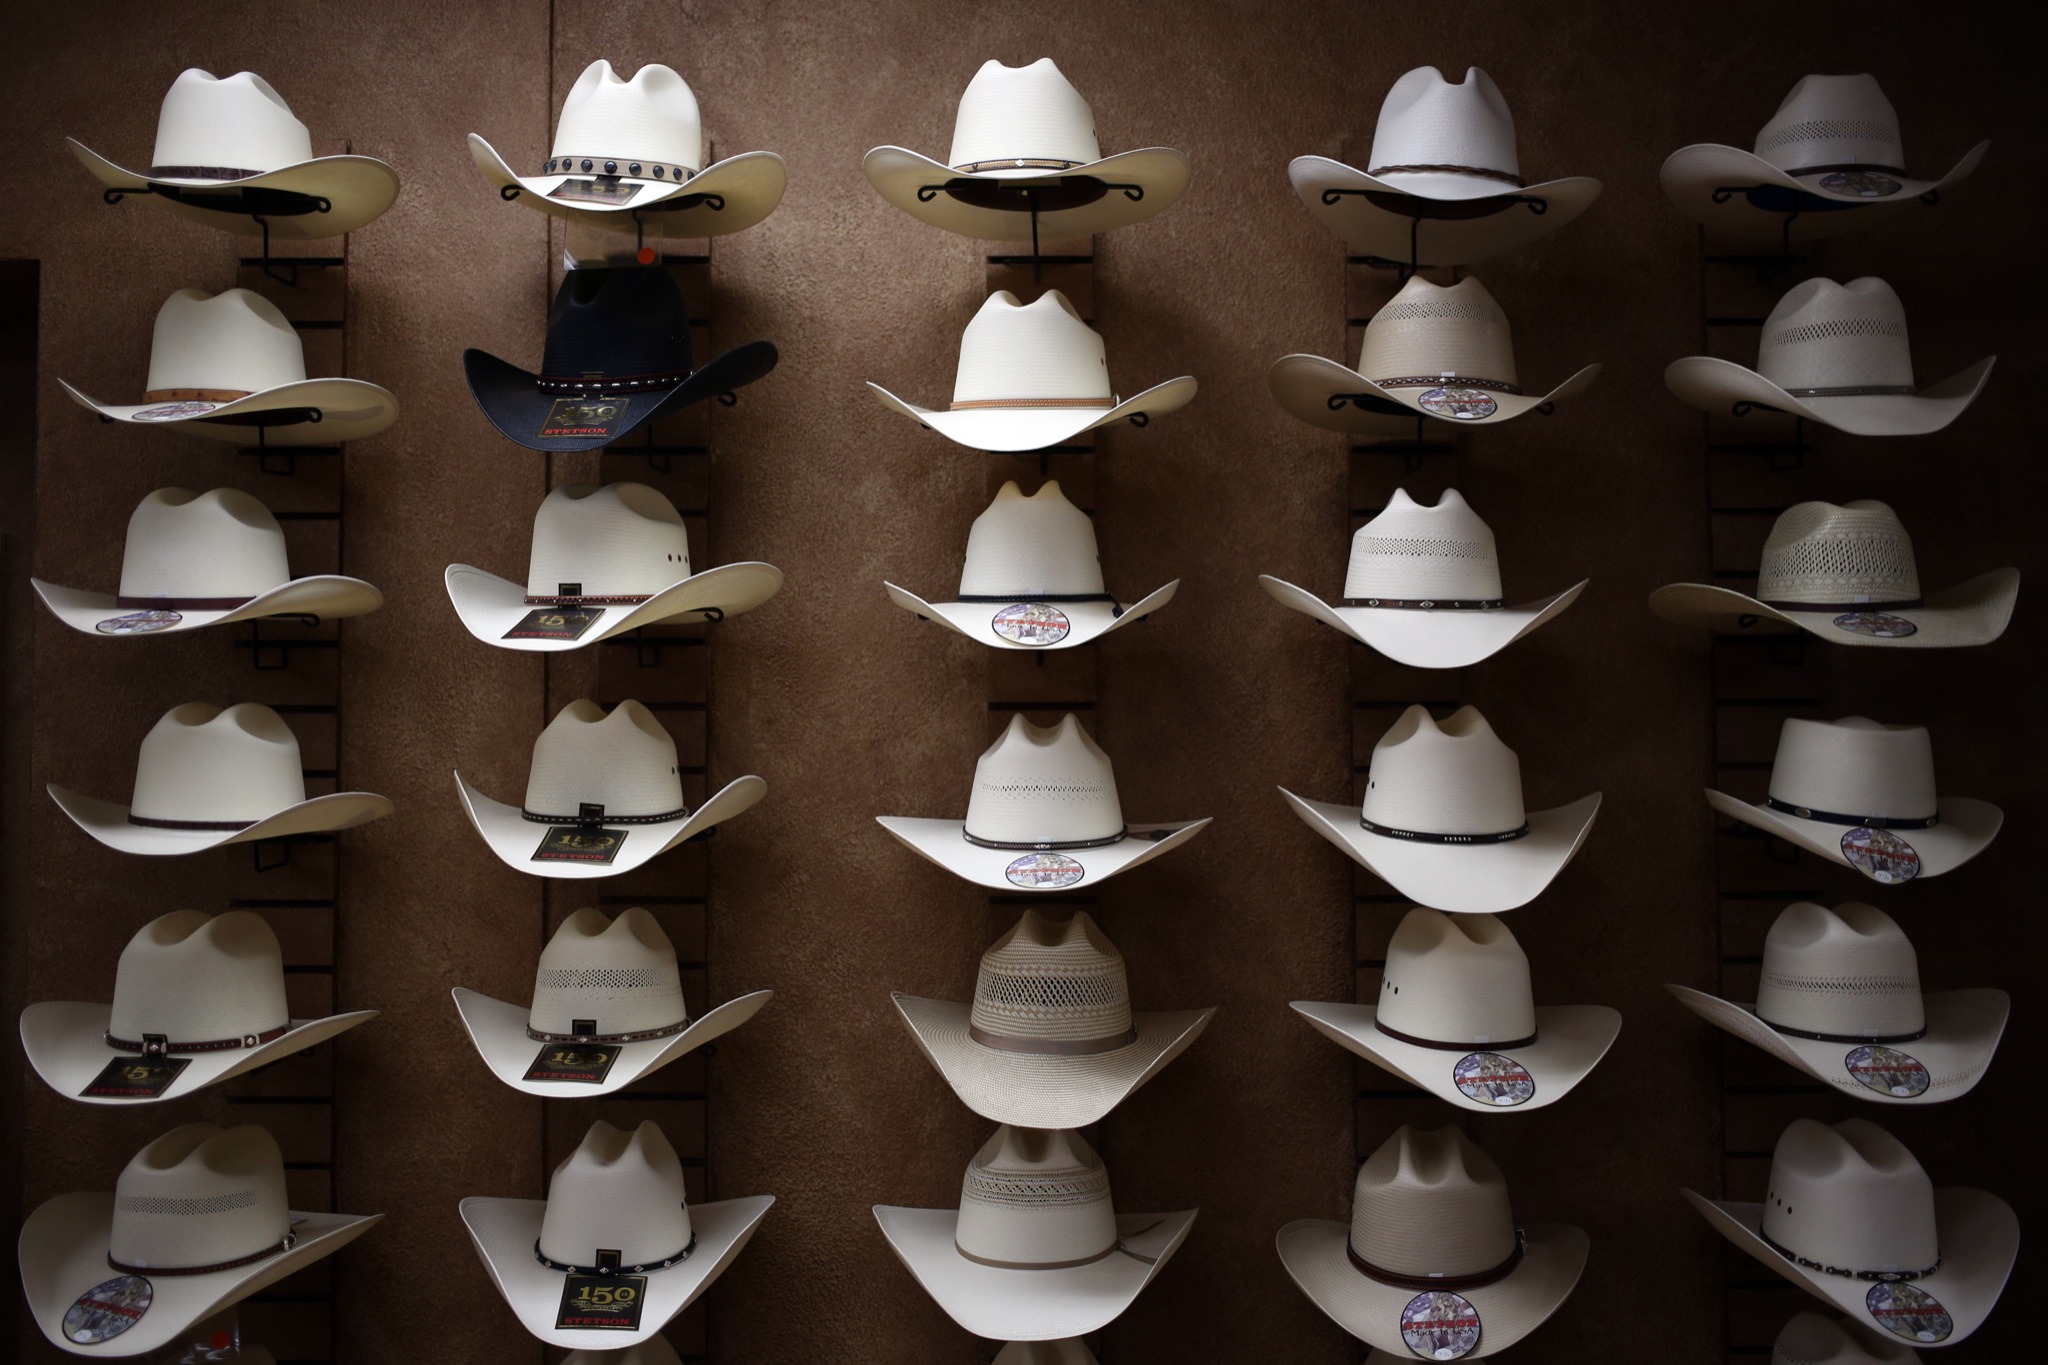 The Texanist: Should I Stop Wearing My Stetson Now That They've Become So  Popular? – Texas Monthly